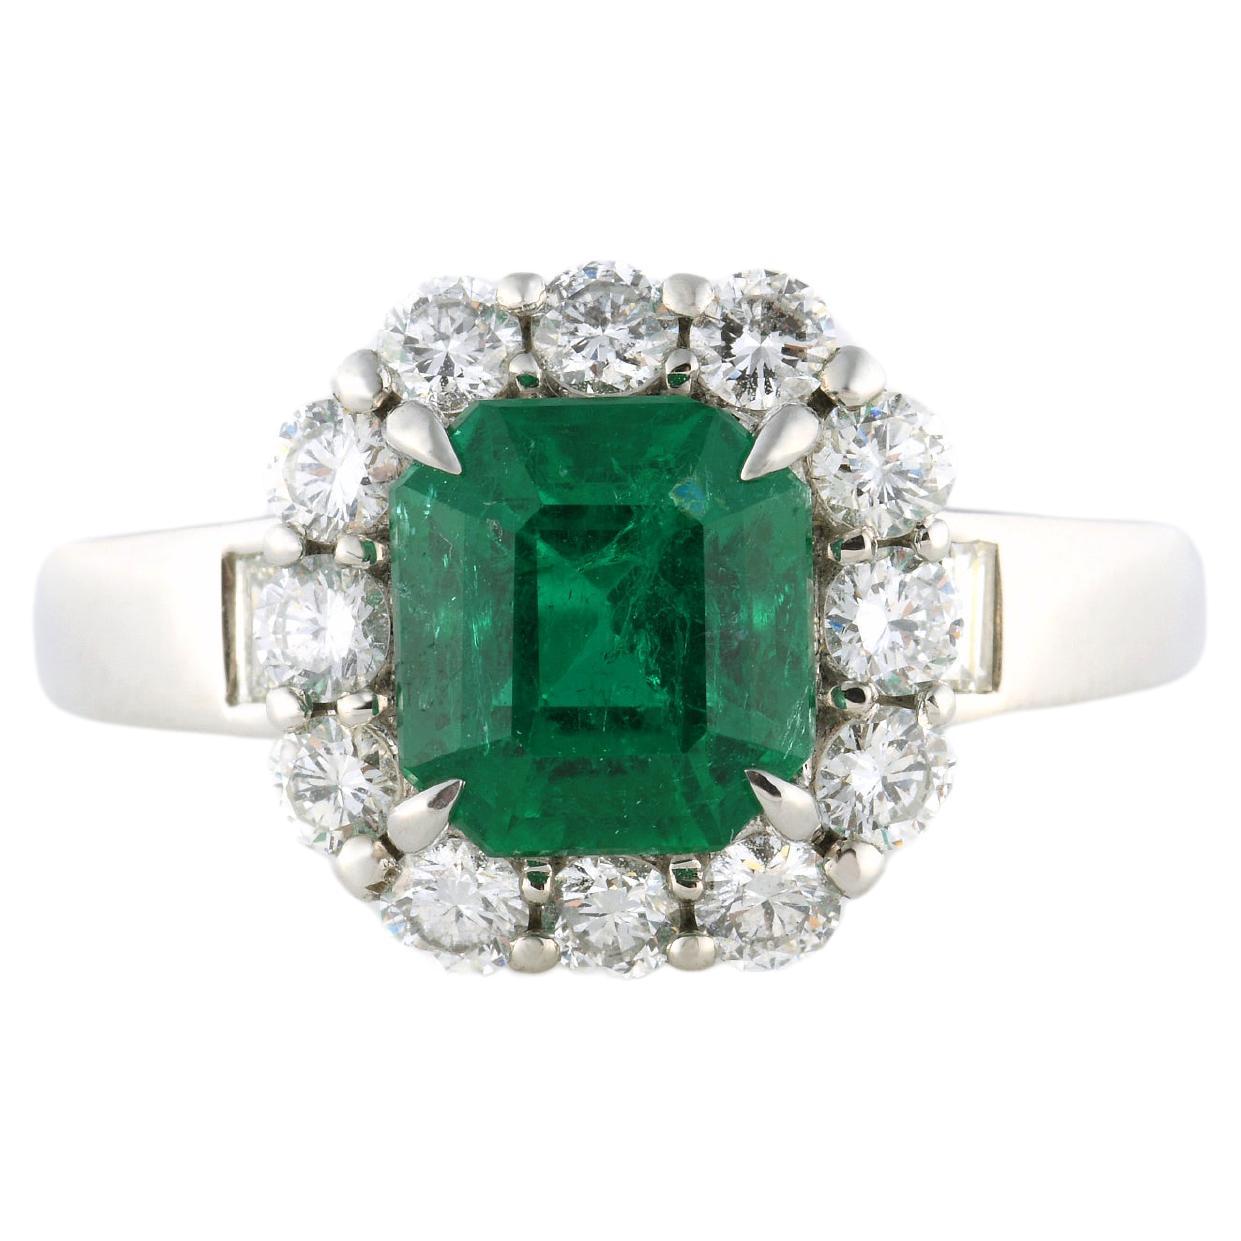 GRS Certified 1.87 ct Muzo "Vivid Green" Colombian Emerald Ring For Sale